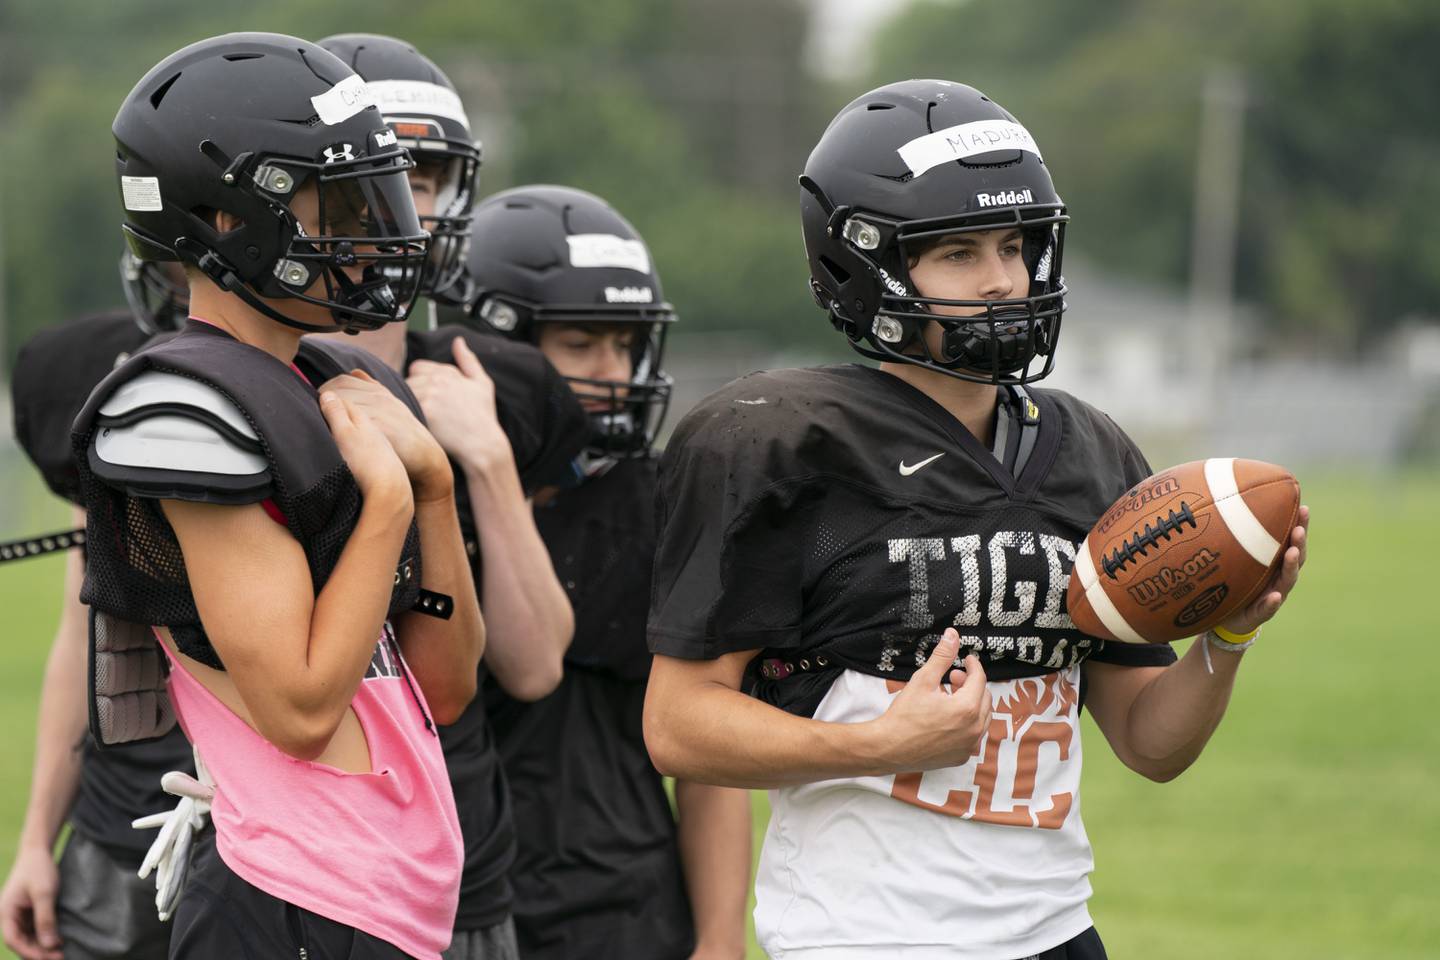 Crystal Lake Central's Jacob Carnrite (left) and quaterback Colton Madura during practice for the Crystal Lake Central varsity football team on Wednesday, July 21 at Crystal Lake Central High School in Crystal Lake.